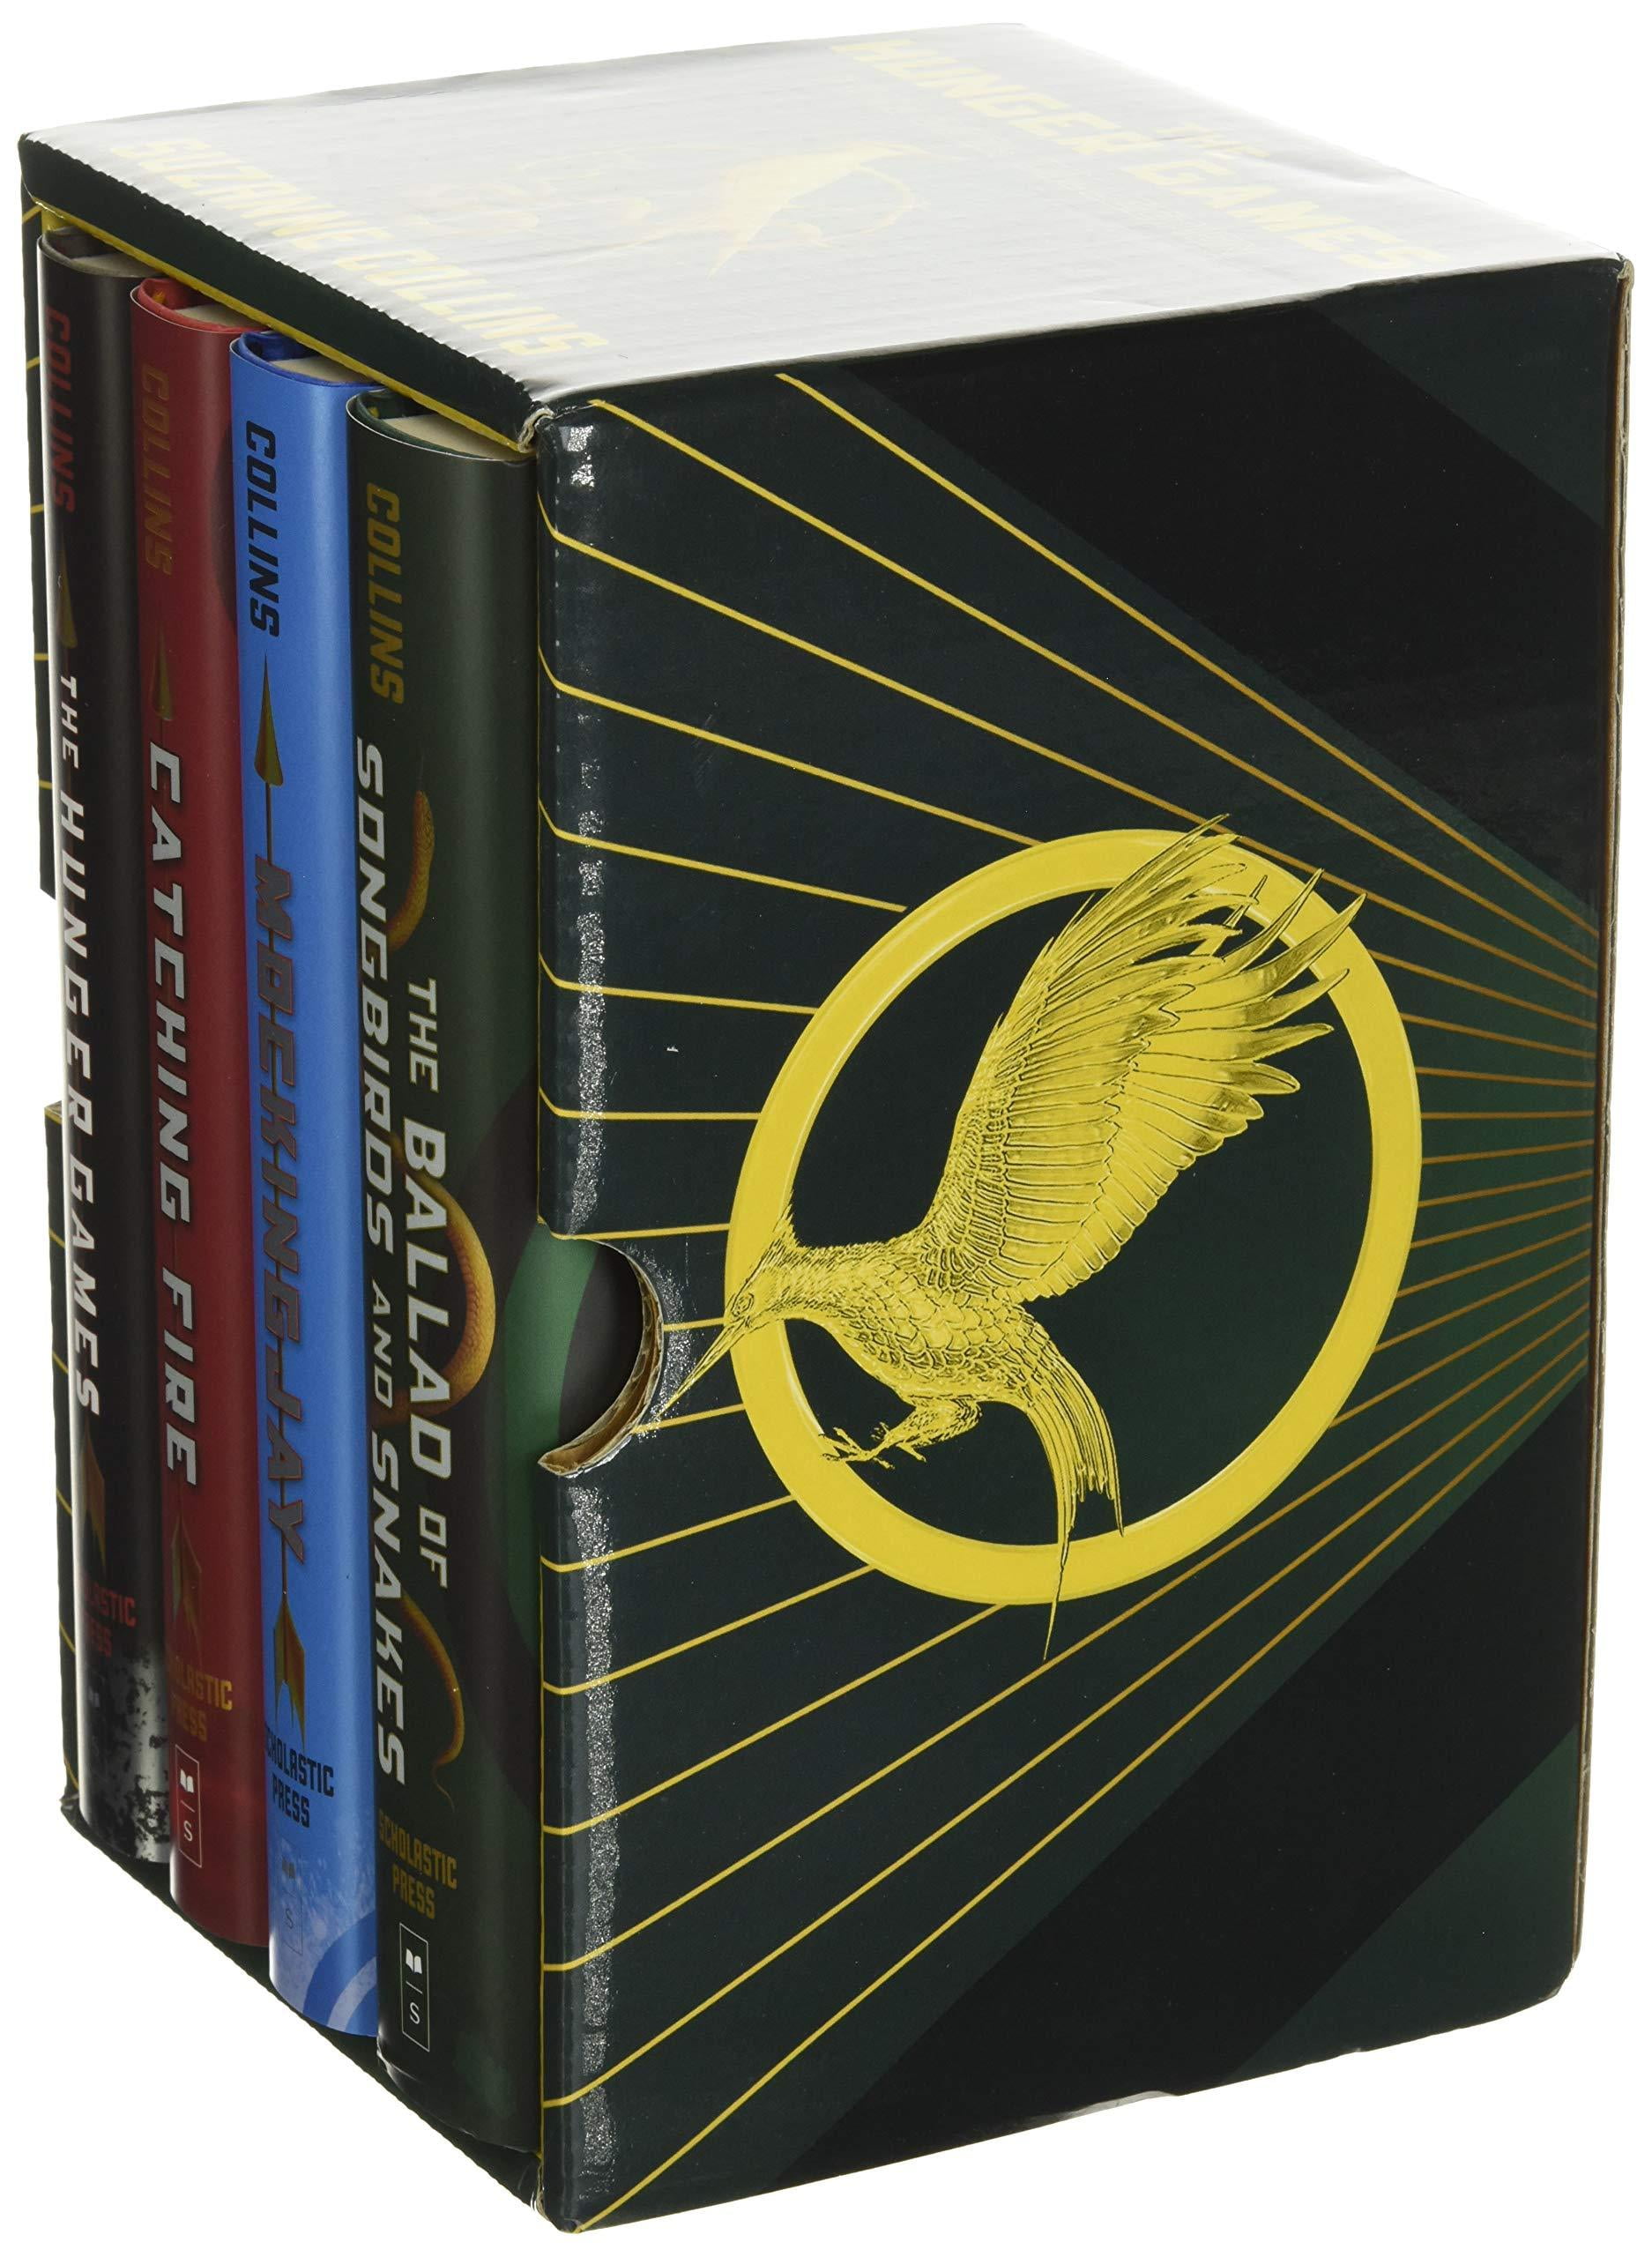 hunger games book age rating